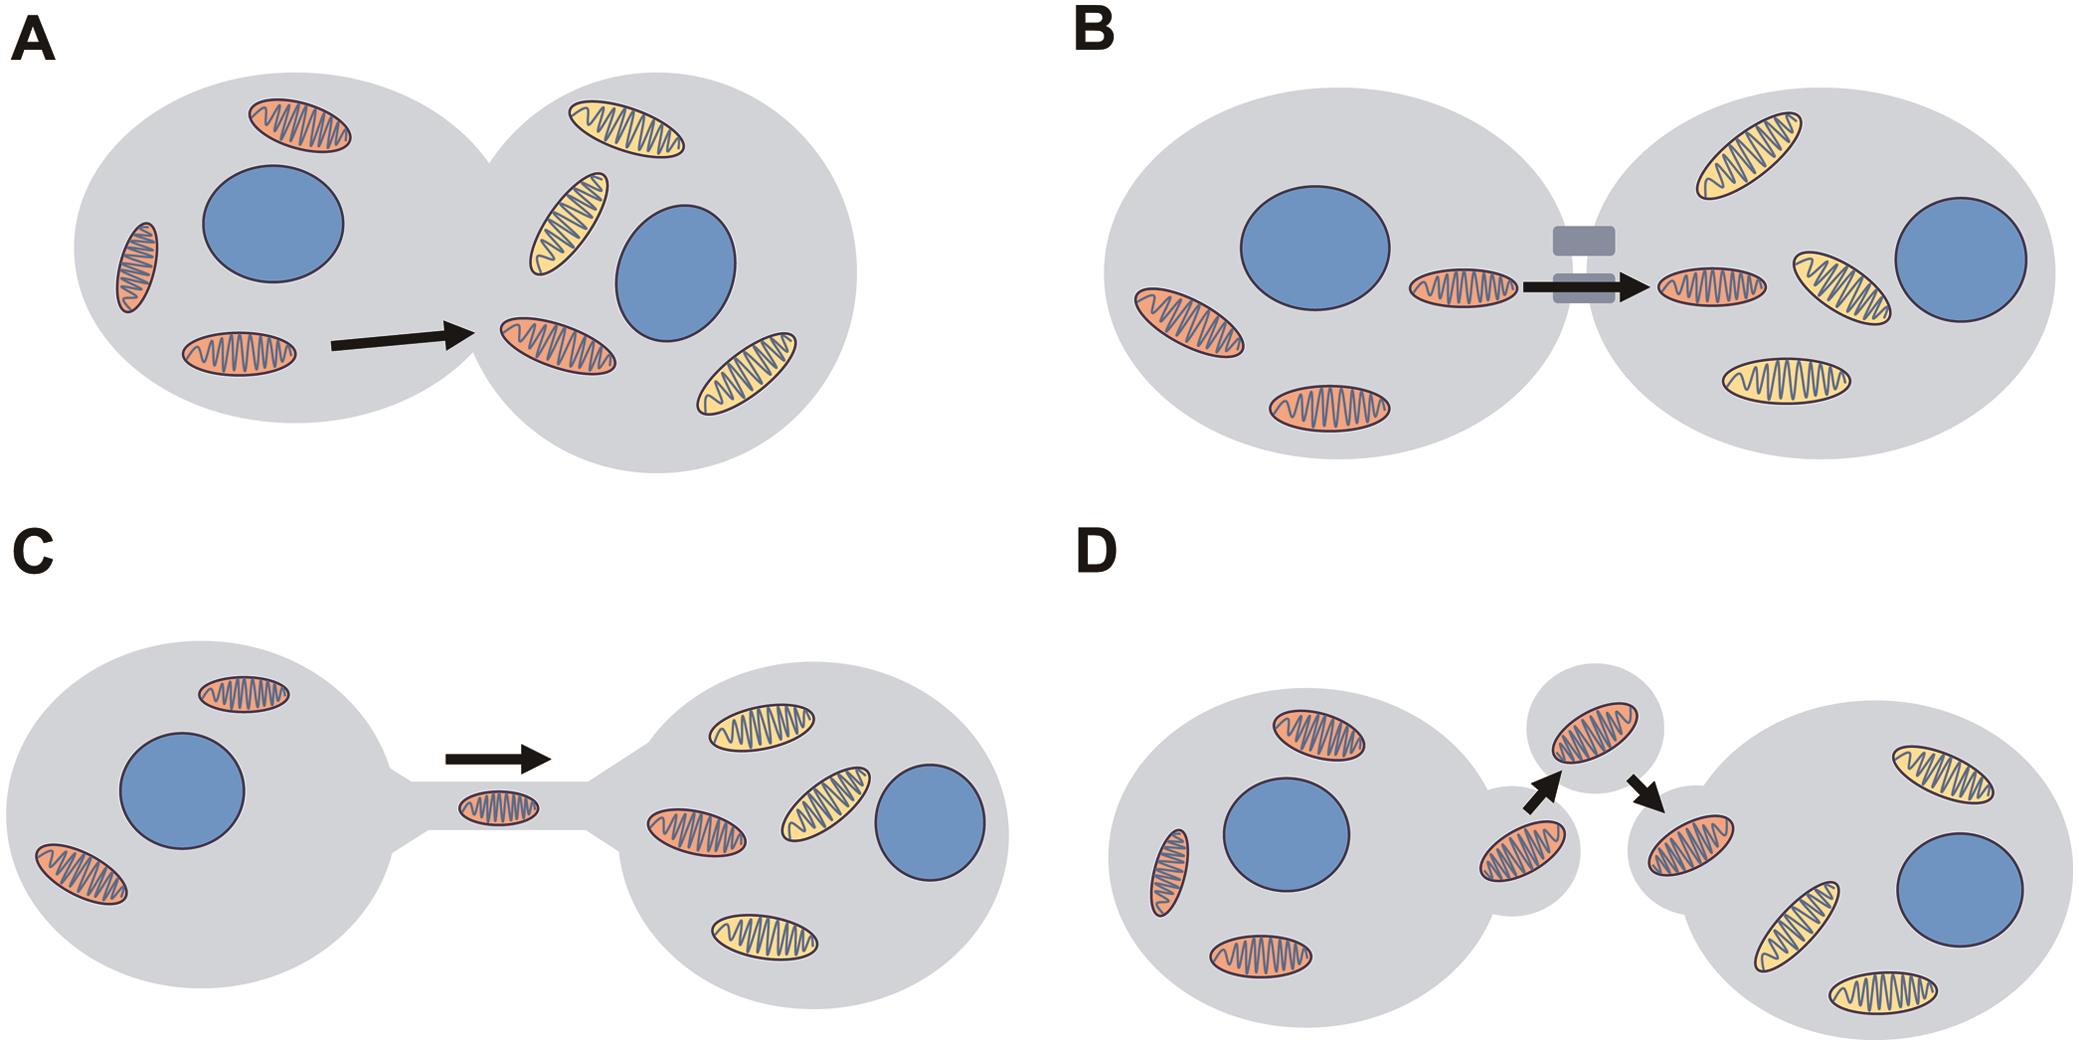 Mechanisms of mitochondrial transfer.